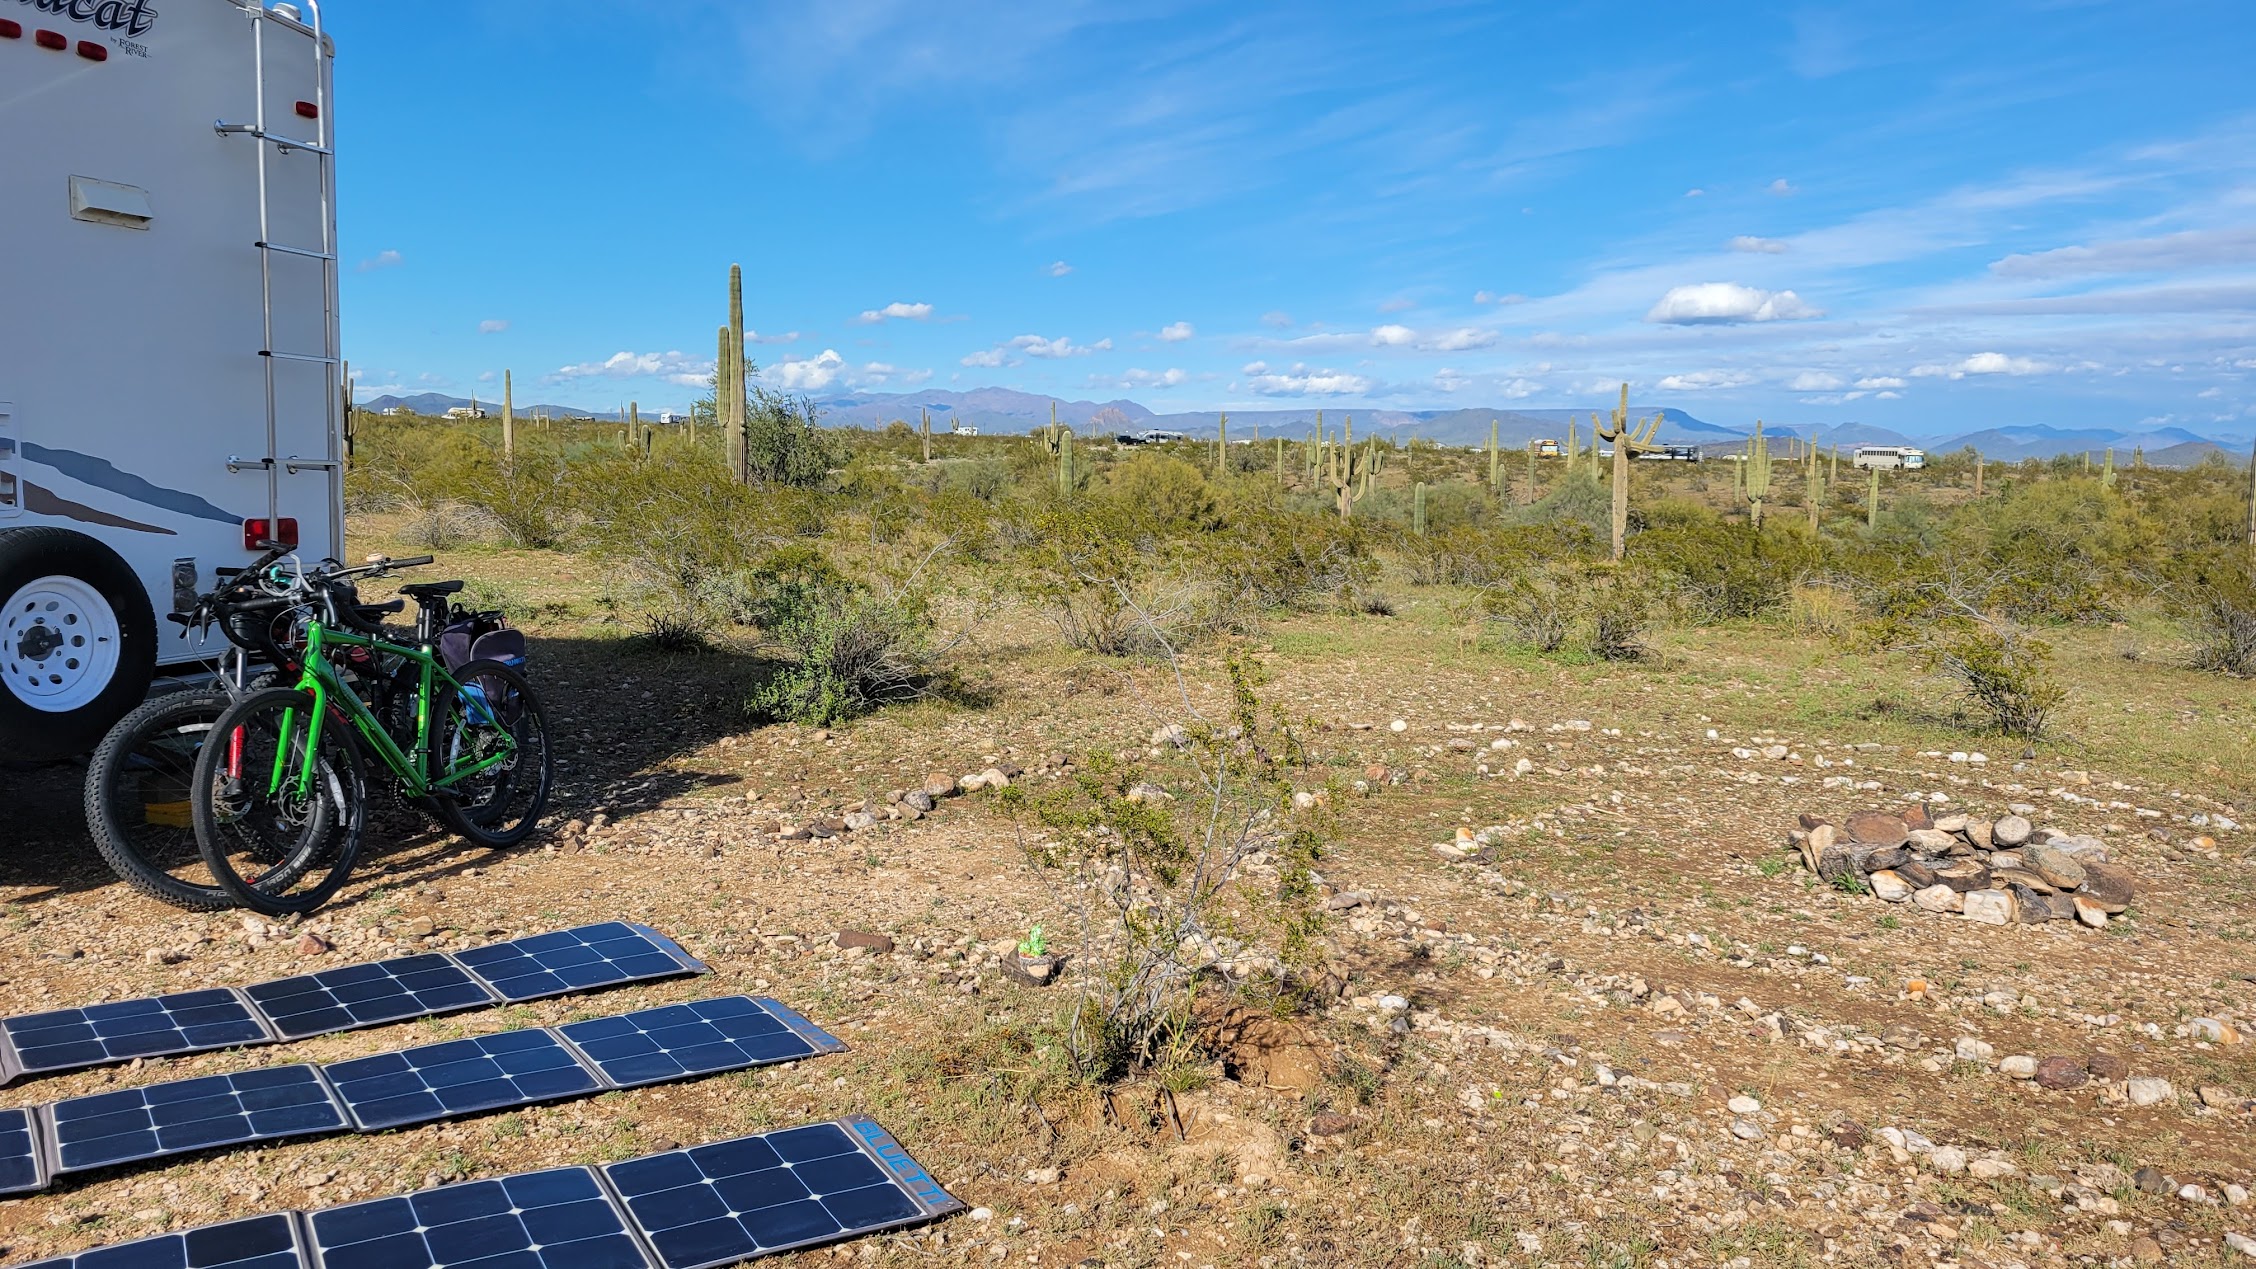 Solar panels provide electricity for a nomad researcher